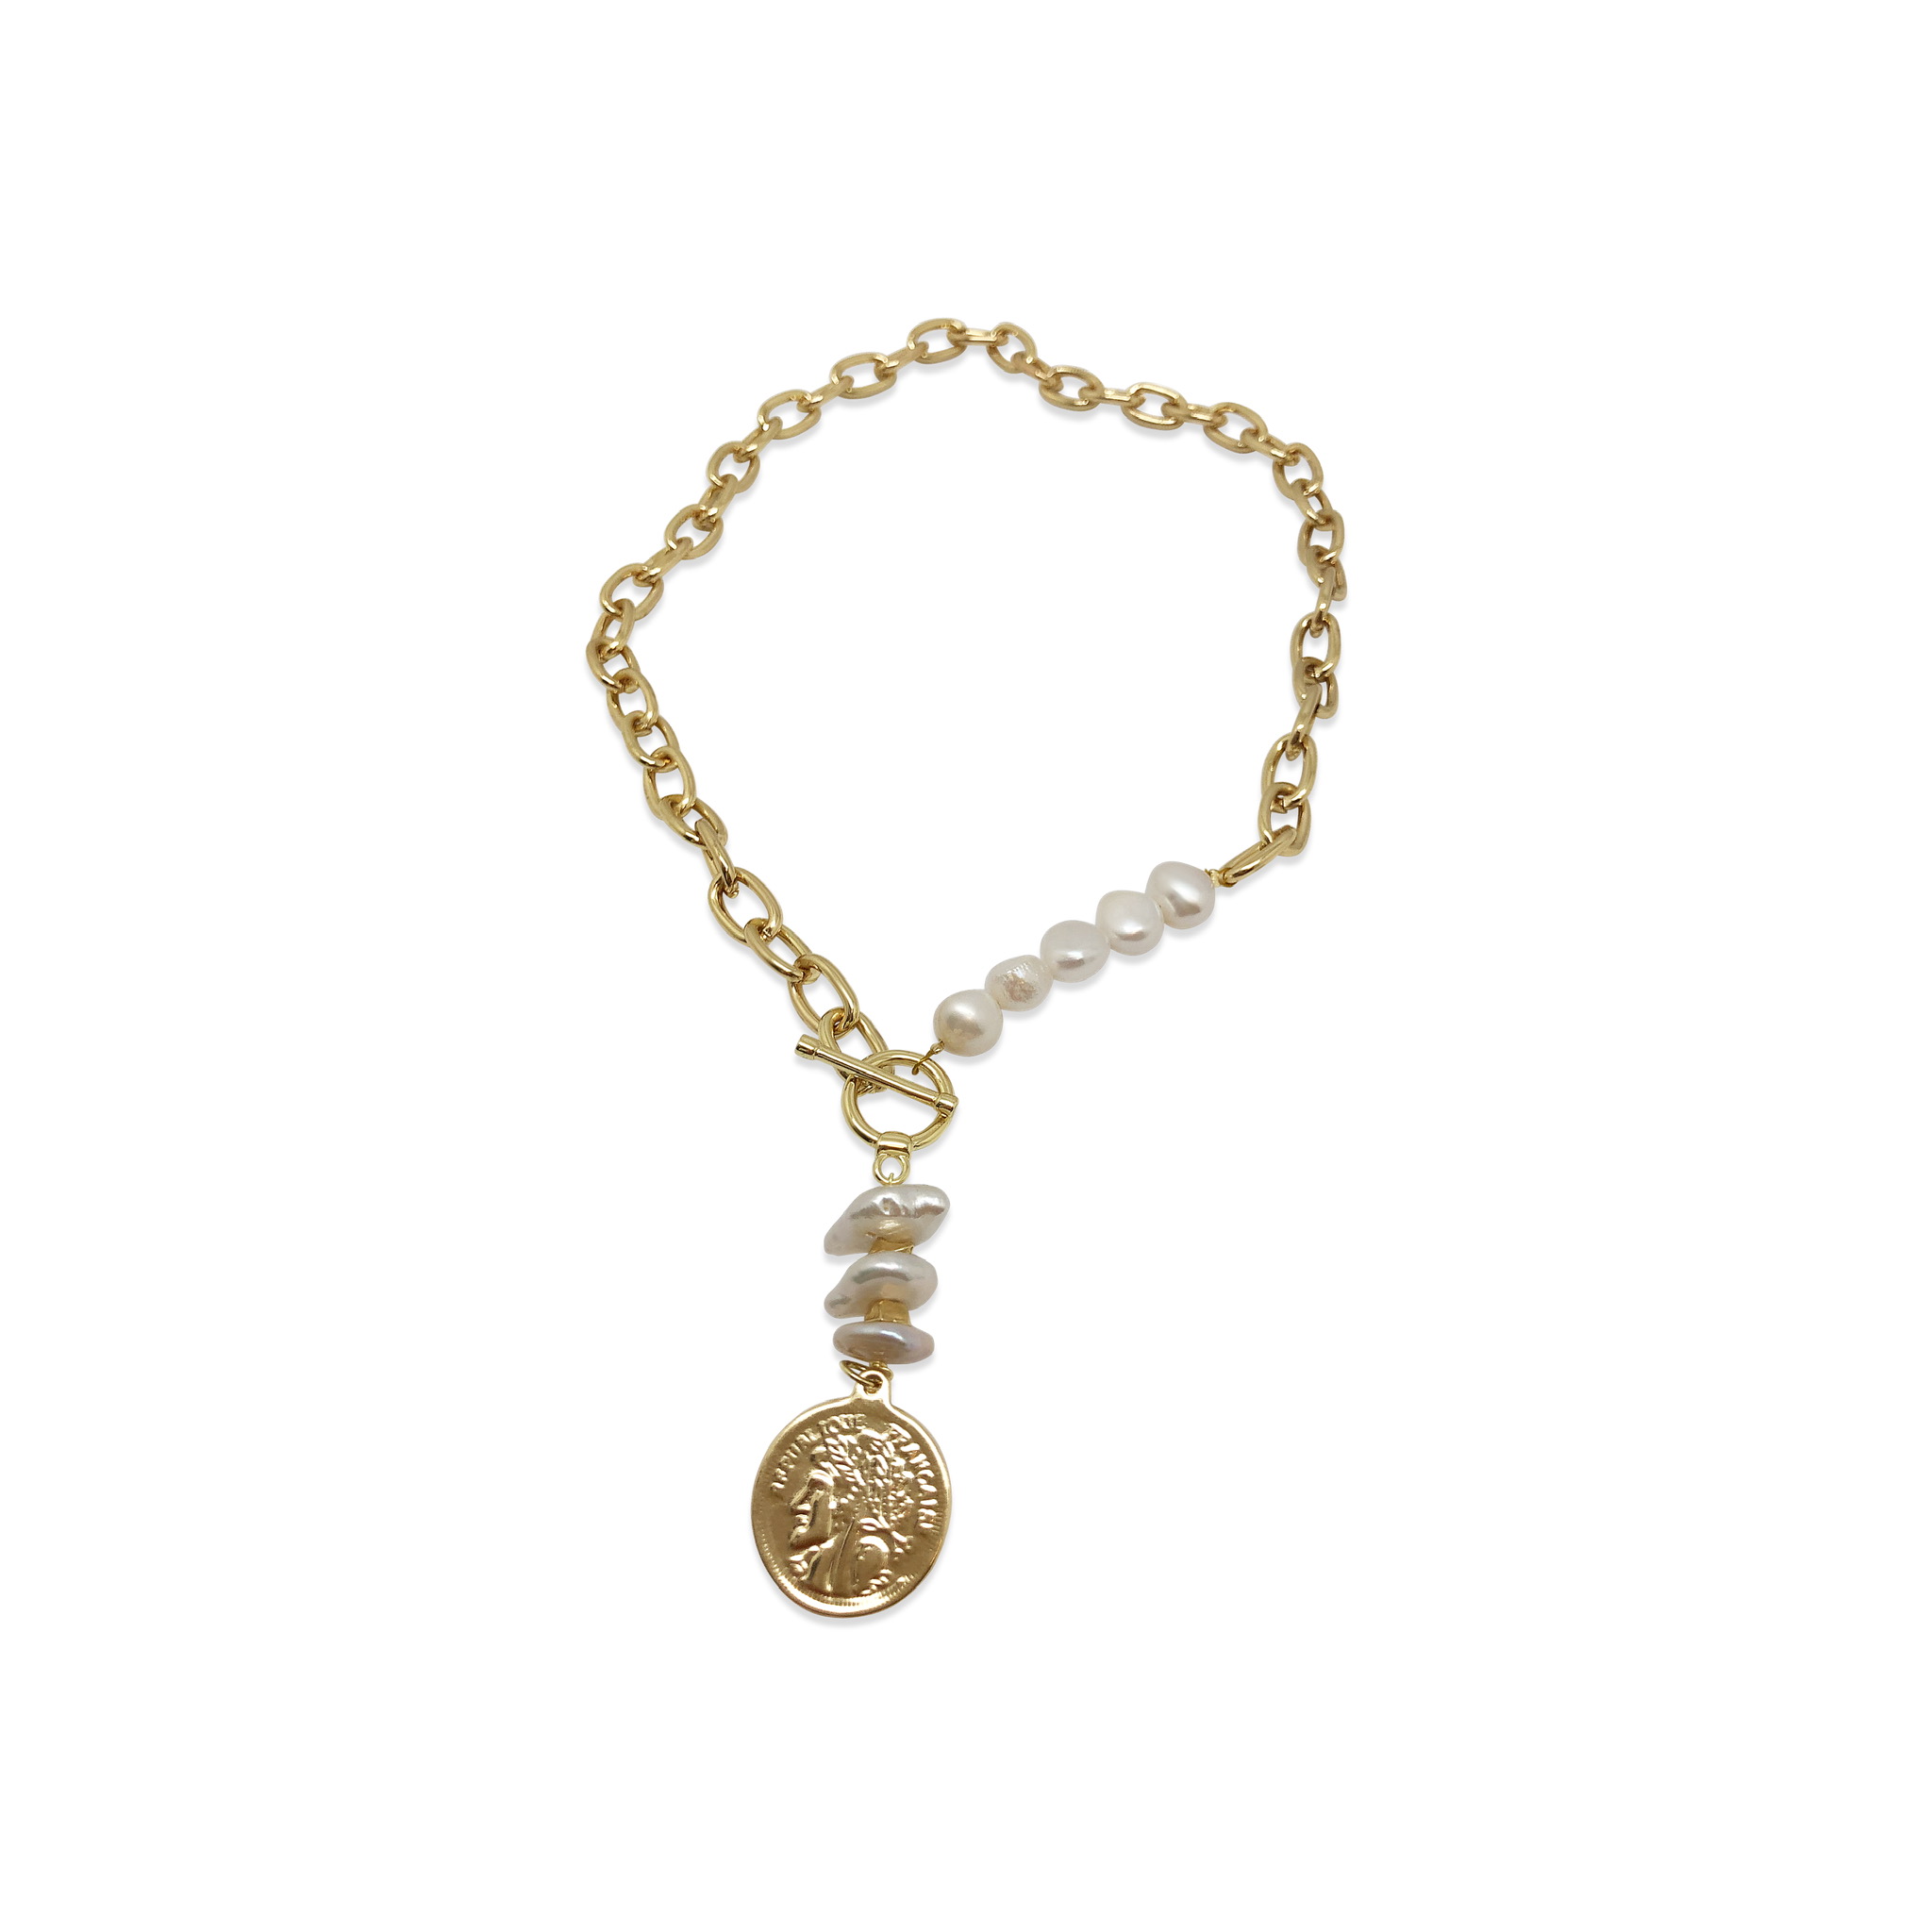 Large Gold Fob Chain Necklace with Pearl pendant | Arista - Jeanette Maree